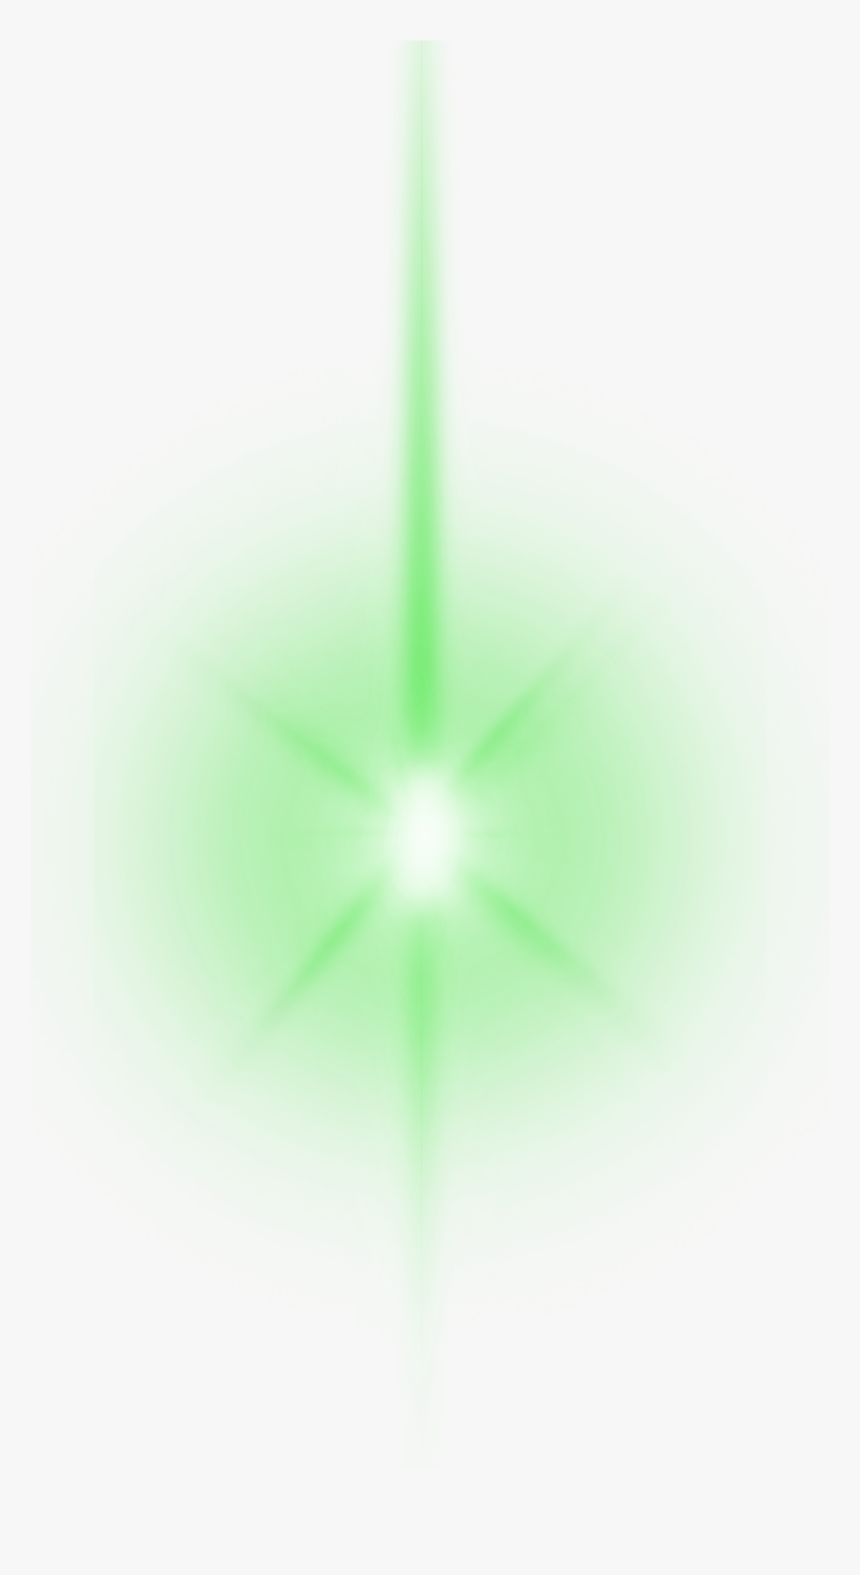 #ftestickers #light #glow #lensflare #sparkle #luminous - Cross, HD Png Download, Free Download